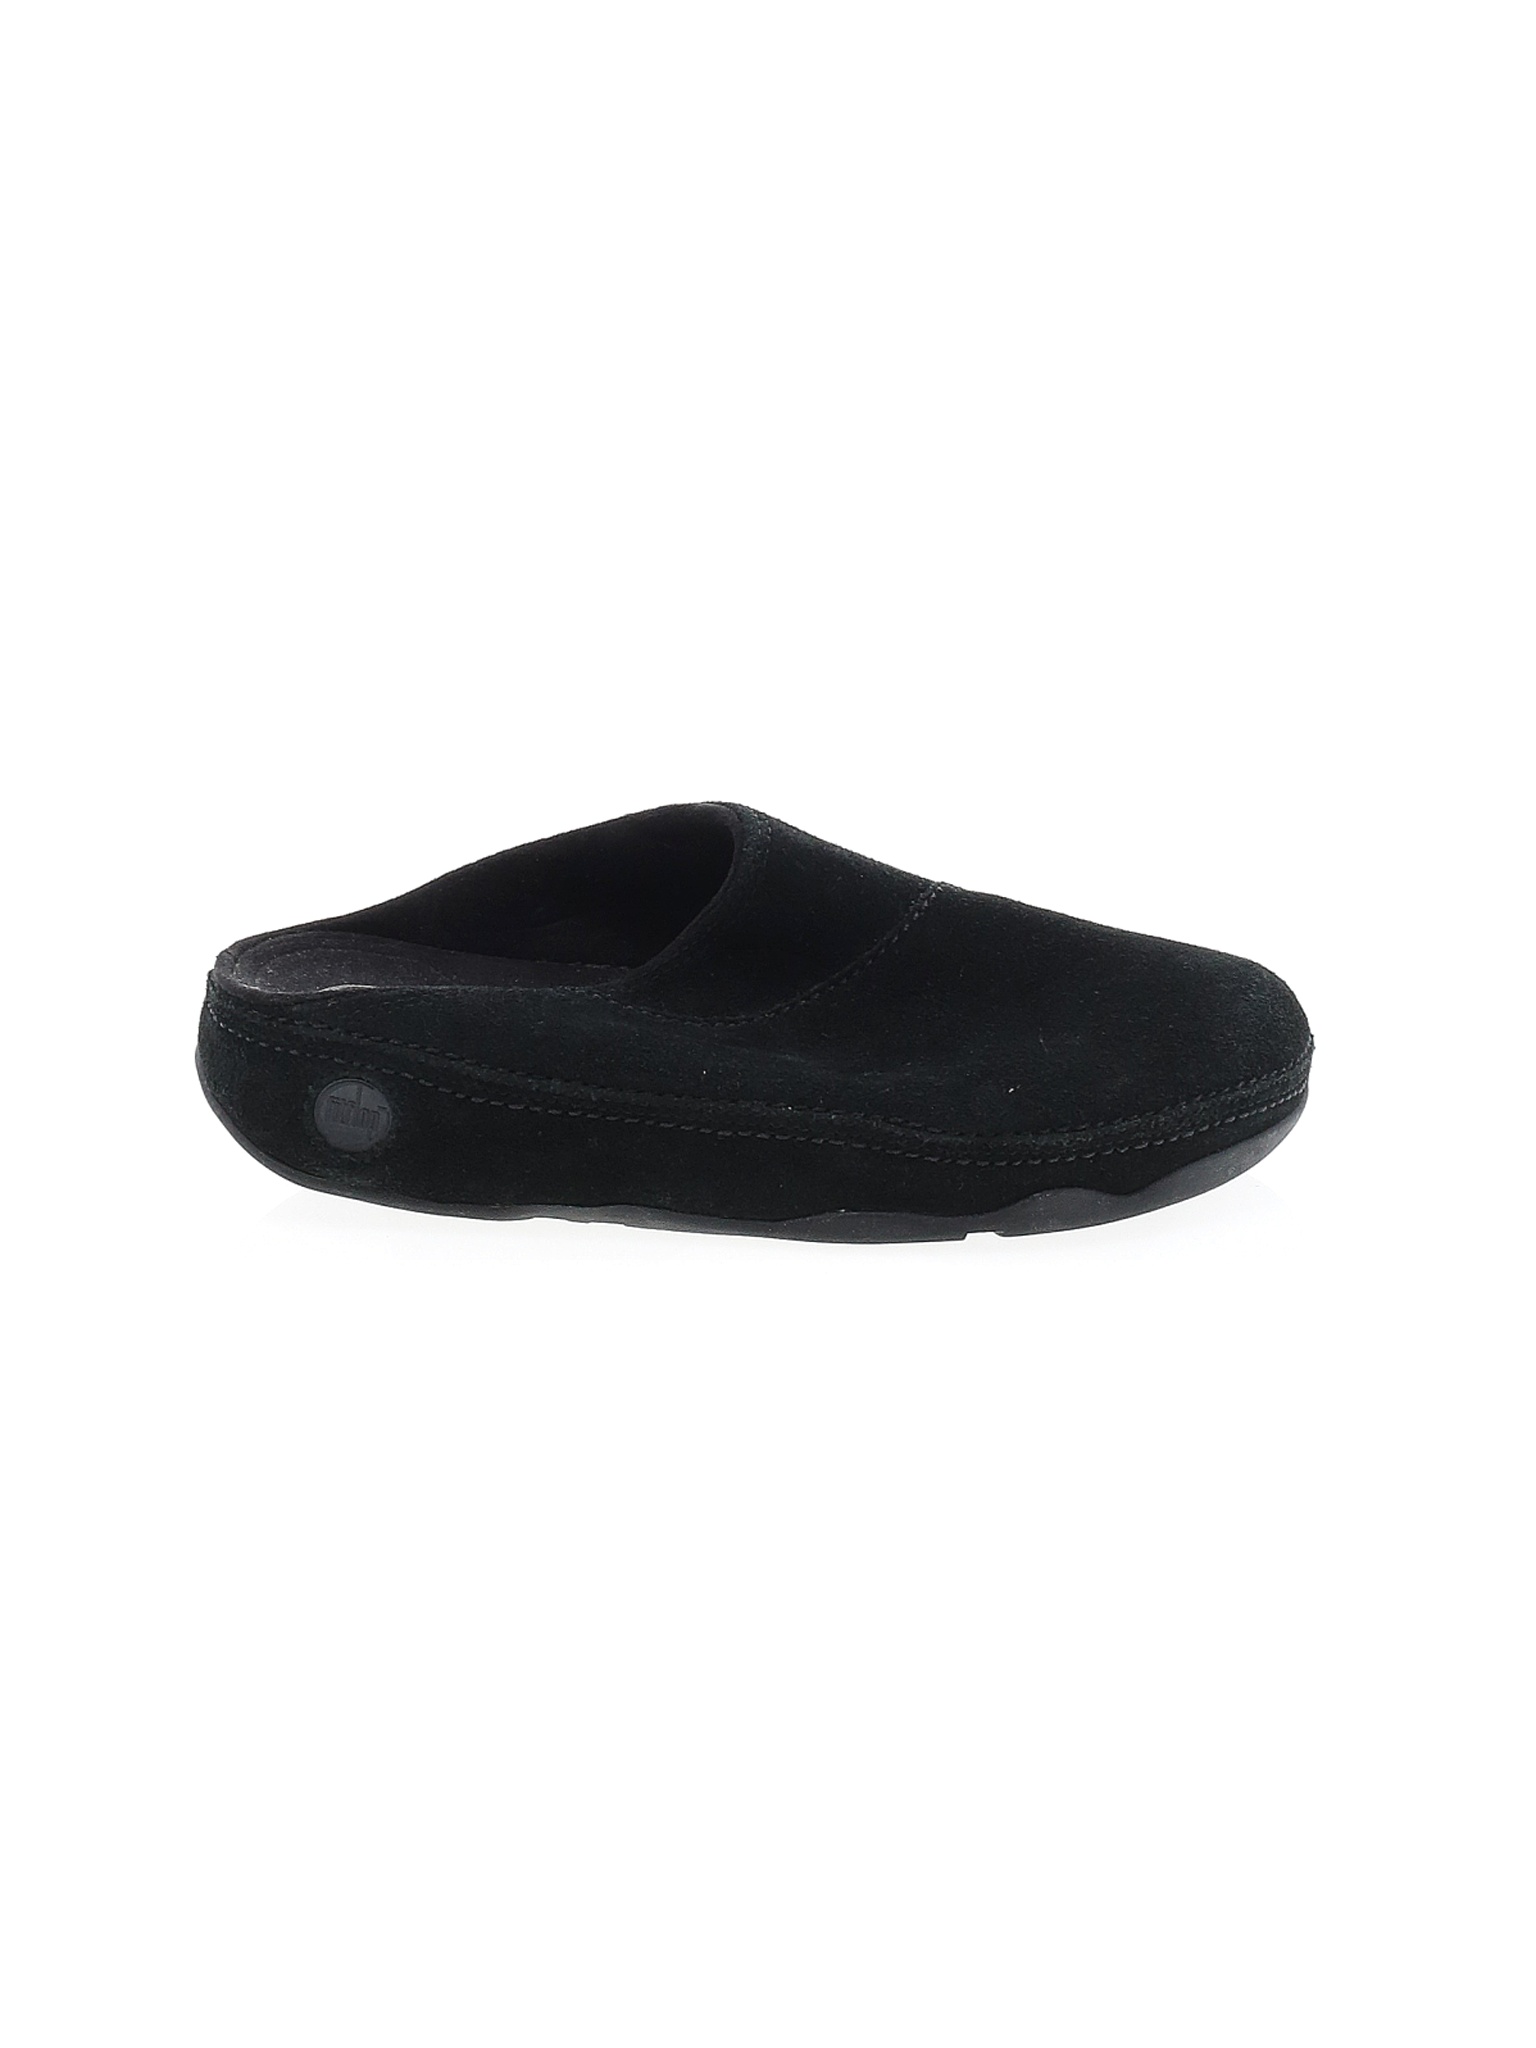 fitflop mules black